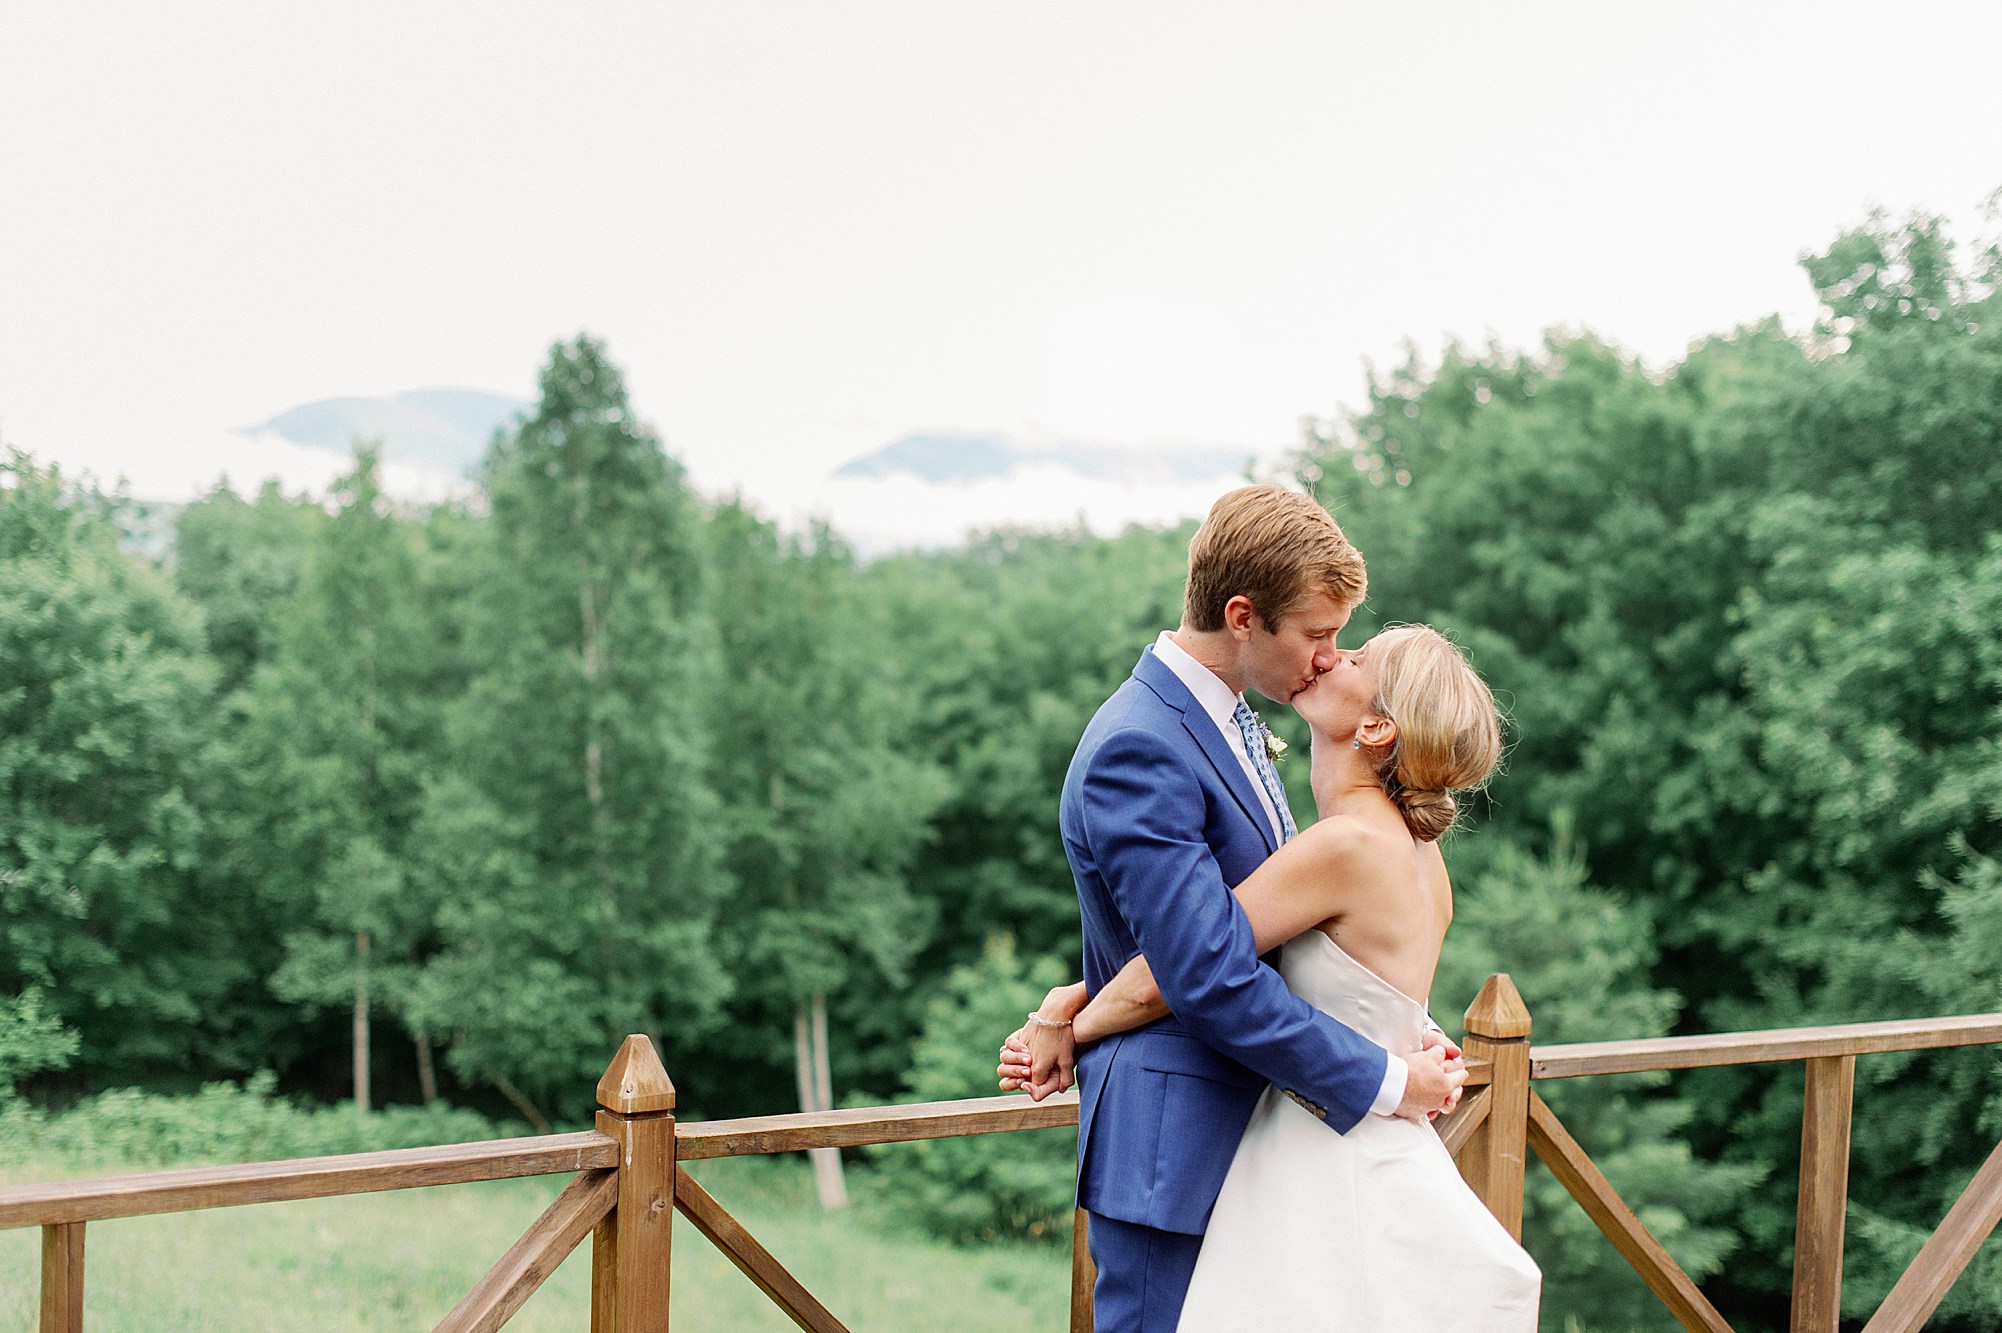 Catskills micro wedding couples portraits with mountains in the background